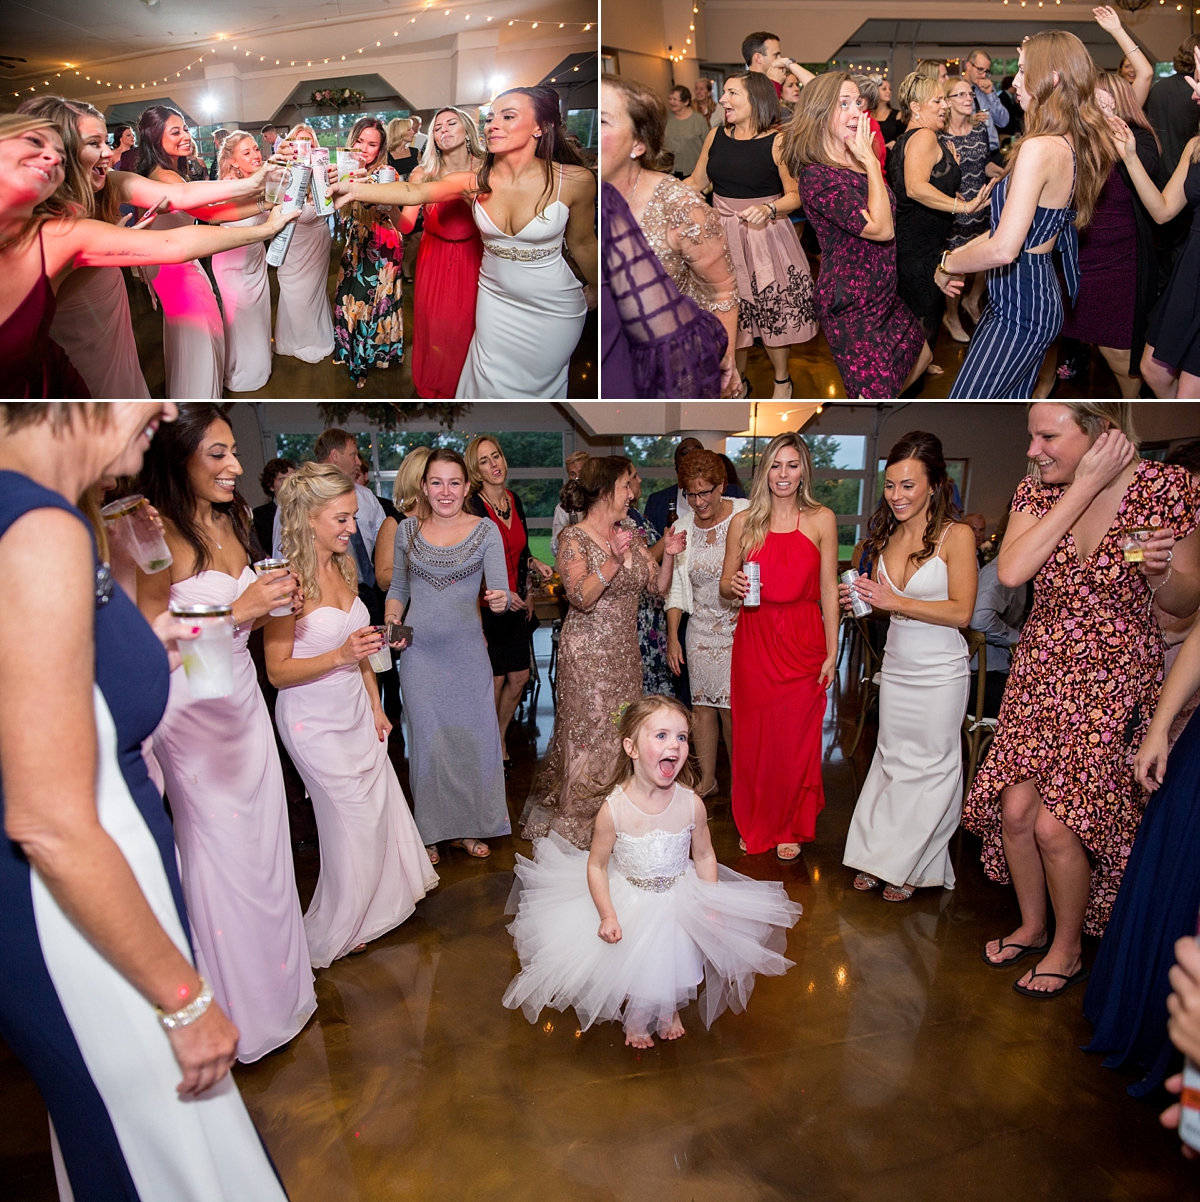 chantelle marie lakehouse and celebration venue, sarah heppell photography, whistlestop florist reception decor, mlh events reception decor, flower girl dances at wedding reception, party people, guests dance at wedding reception